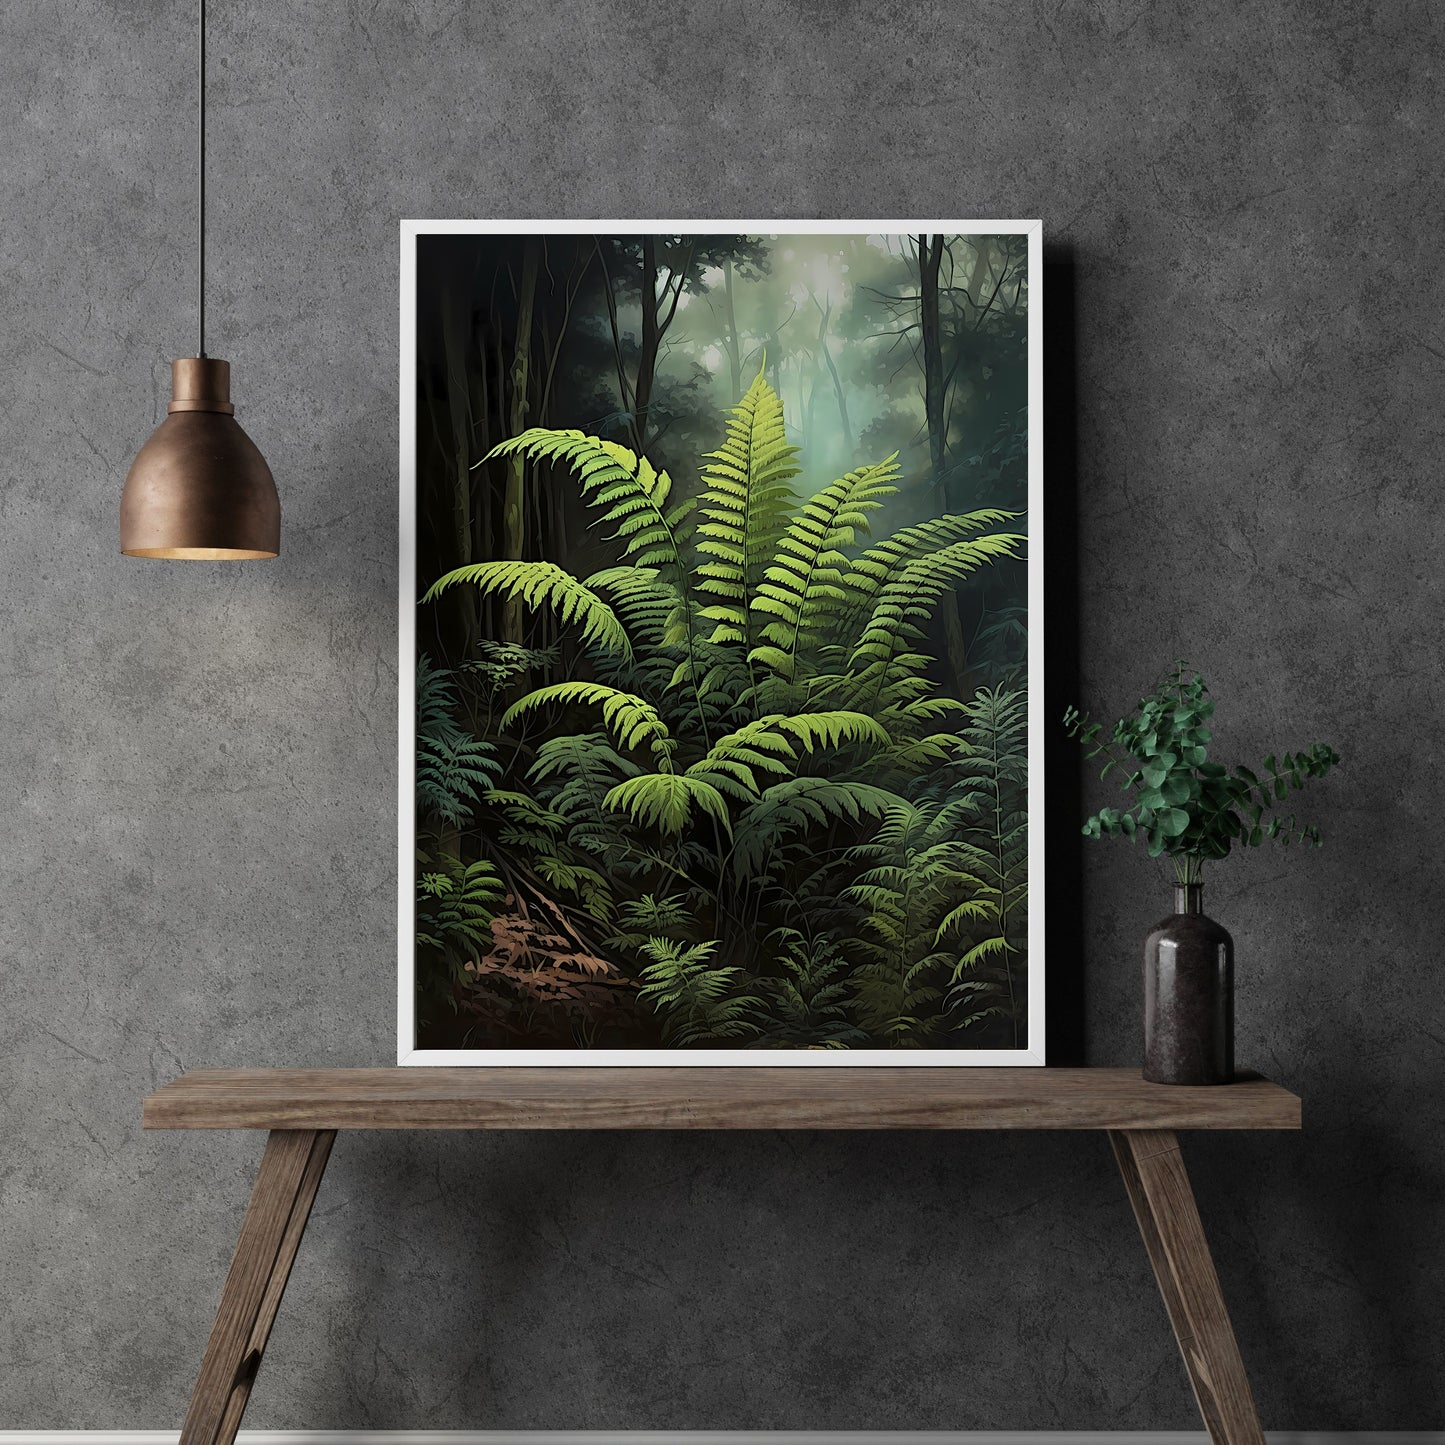 Fern in Deep Forest Dark Cottagecore Wall Art Vintage Botanical Decor Green Aesthetic Wall Art Goblincore Oil Painting Dark Moody Gothic Paper Poster Print